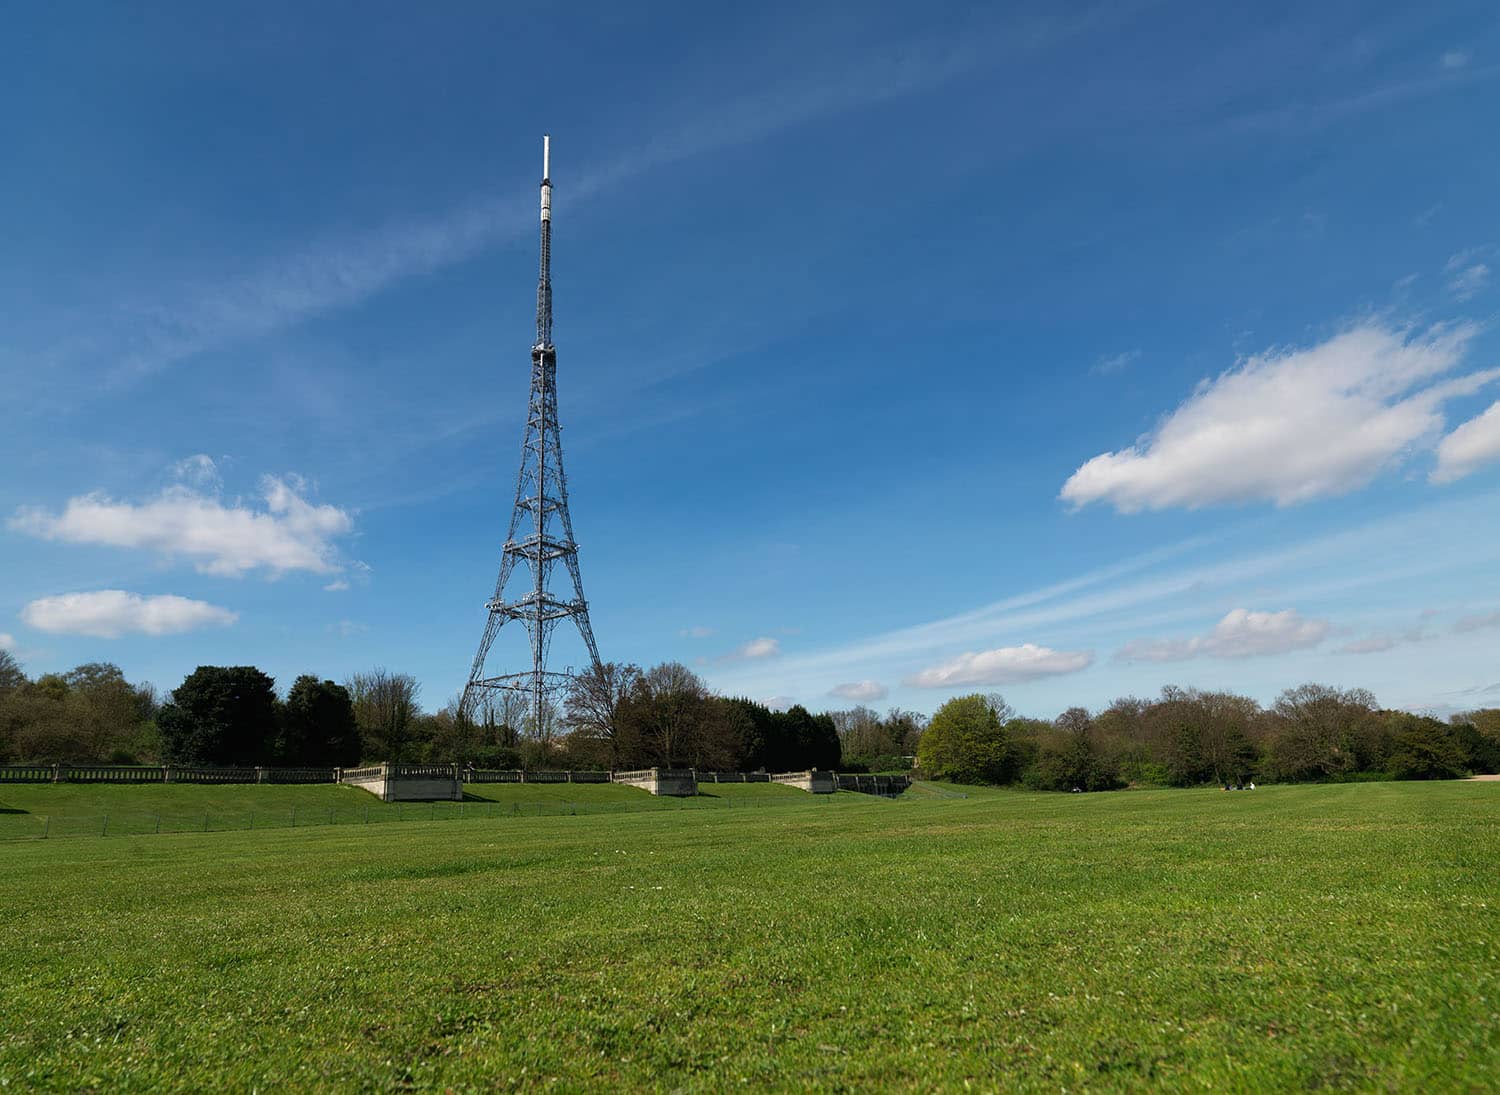 Arqiva transmitting station at Crystal Palace, south London has capacity for both FM and DAB services, as well as TV